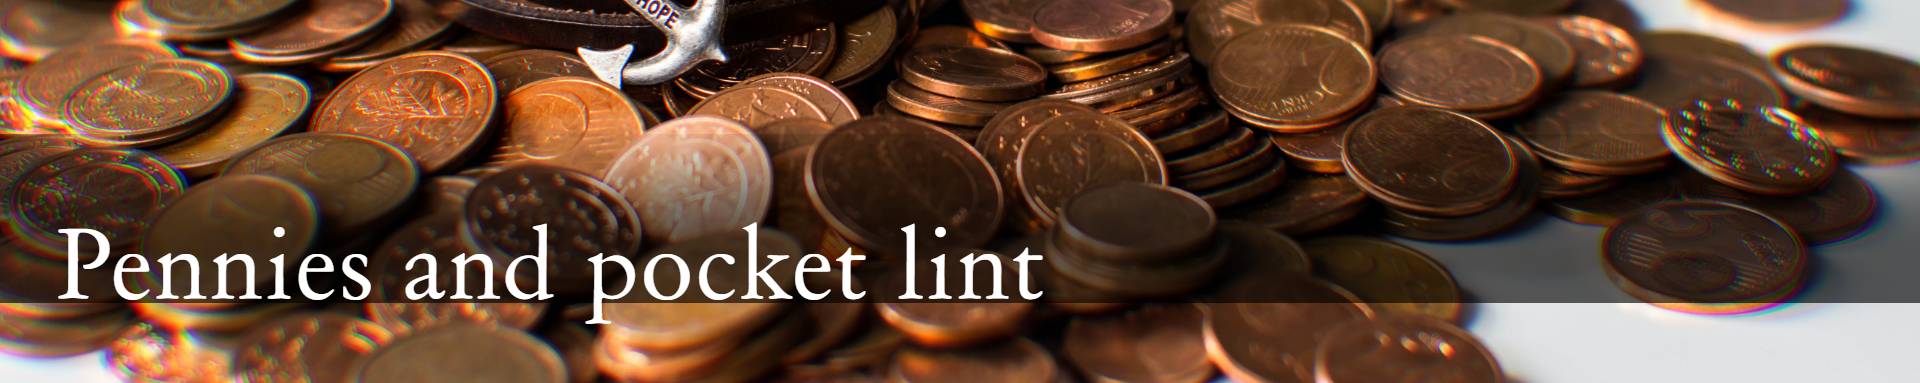 Pennies and pocket lint